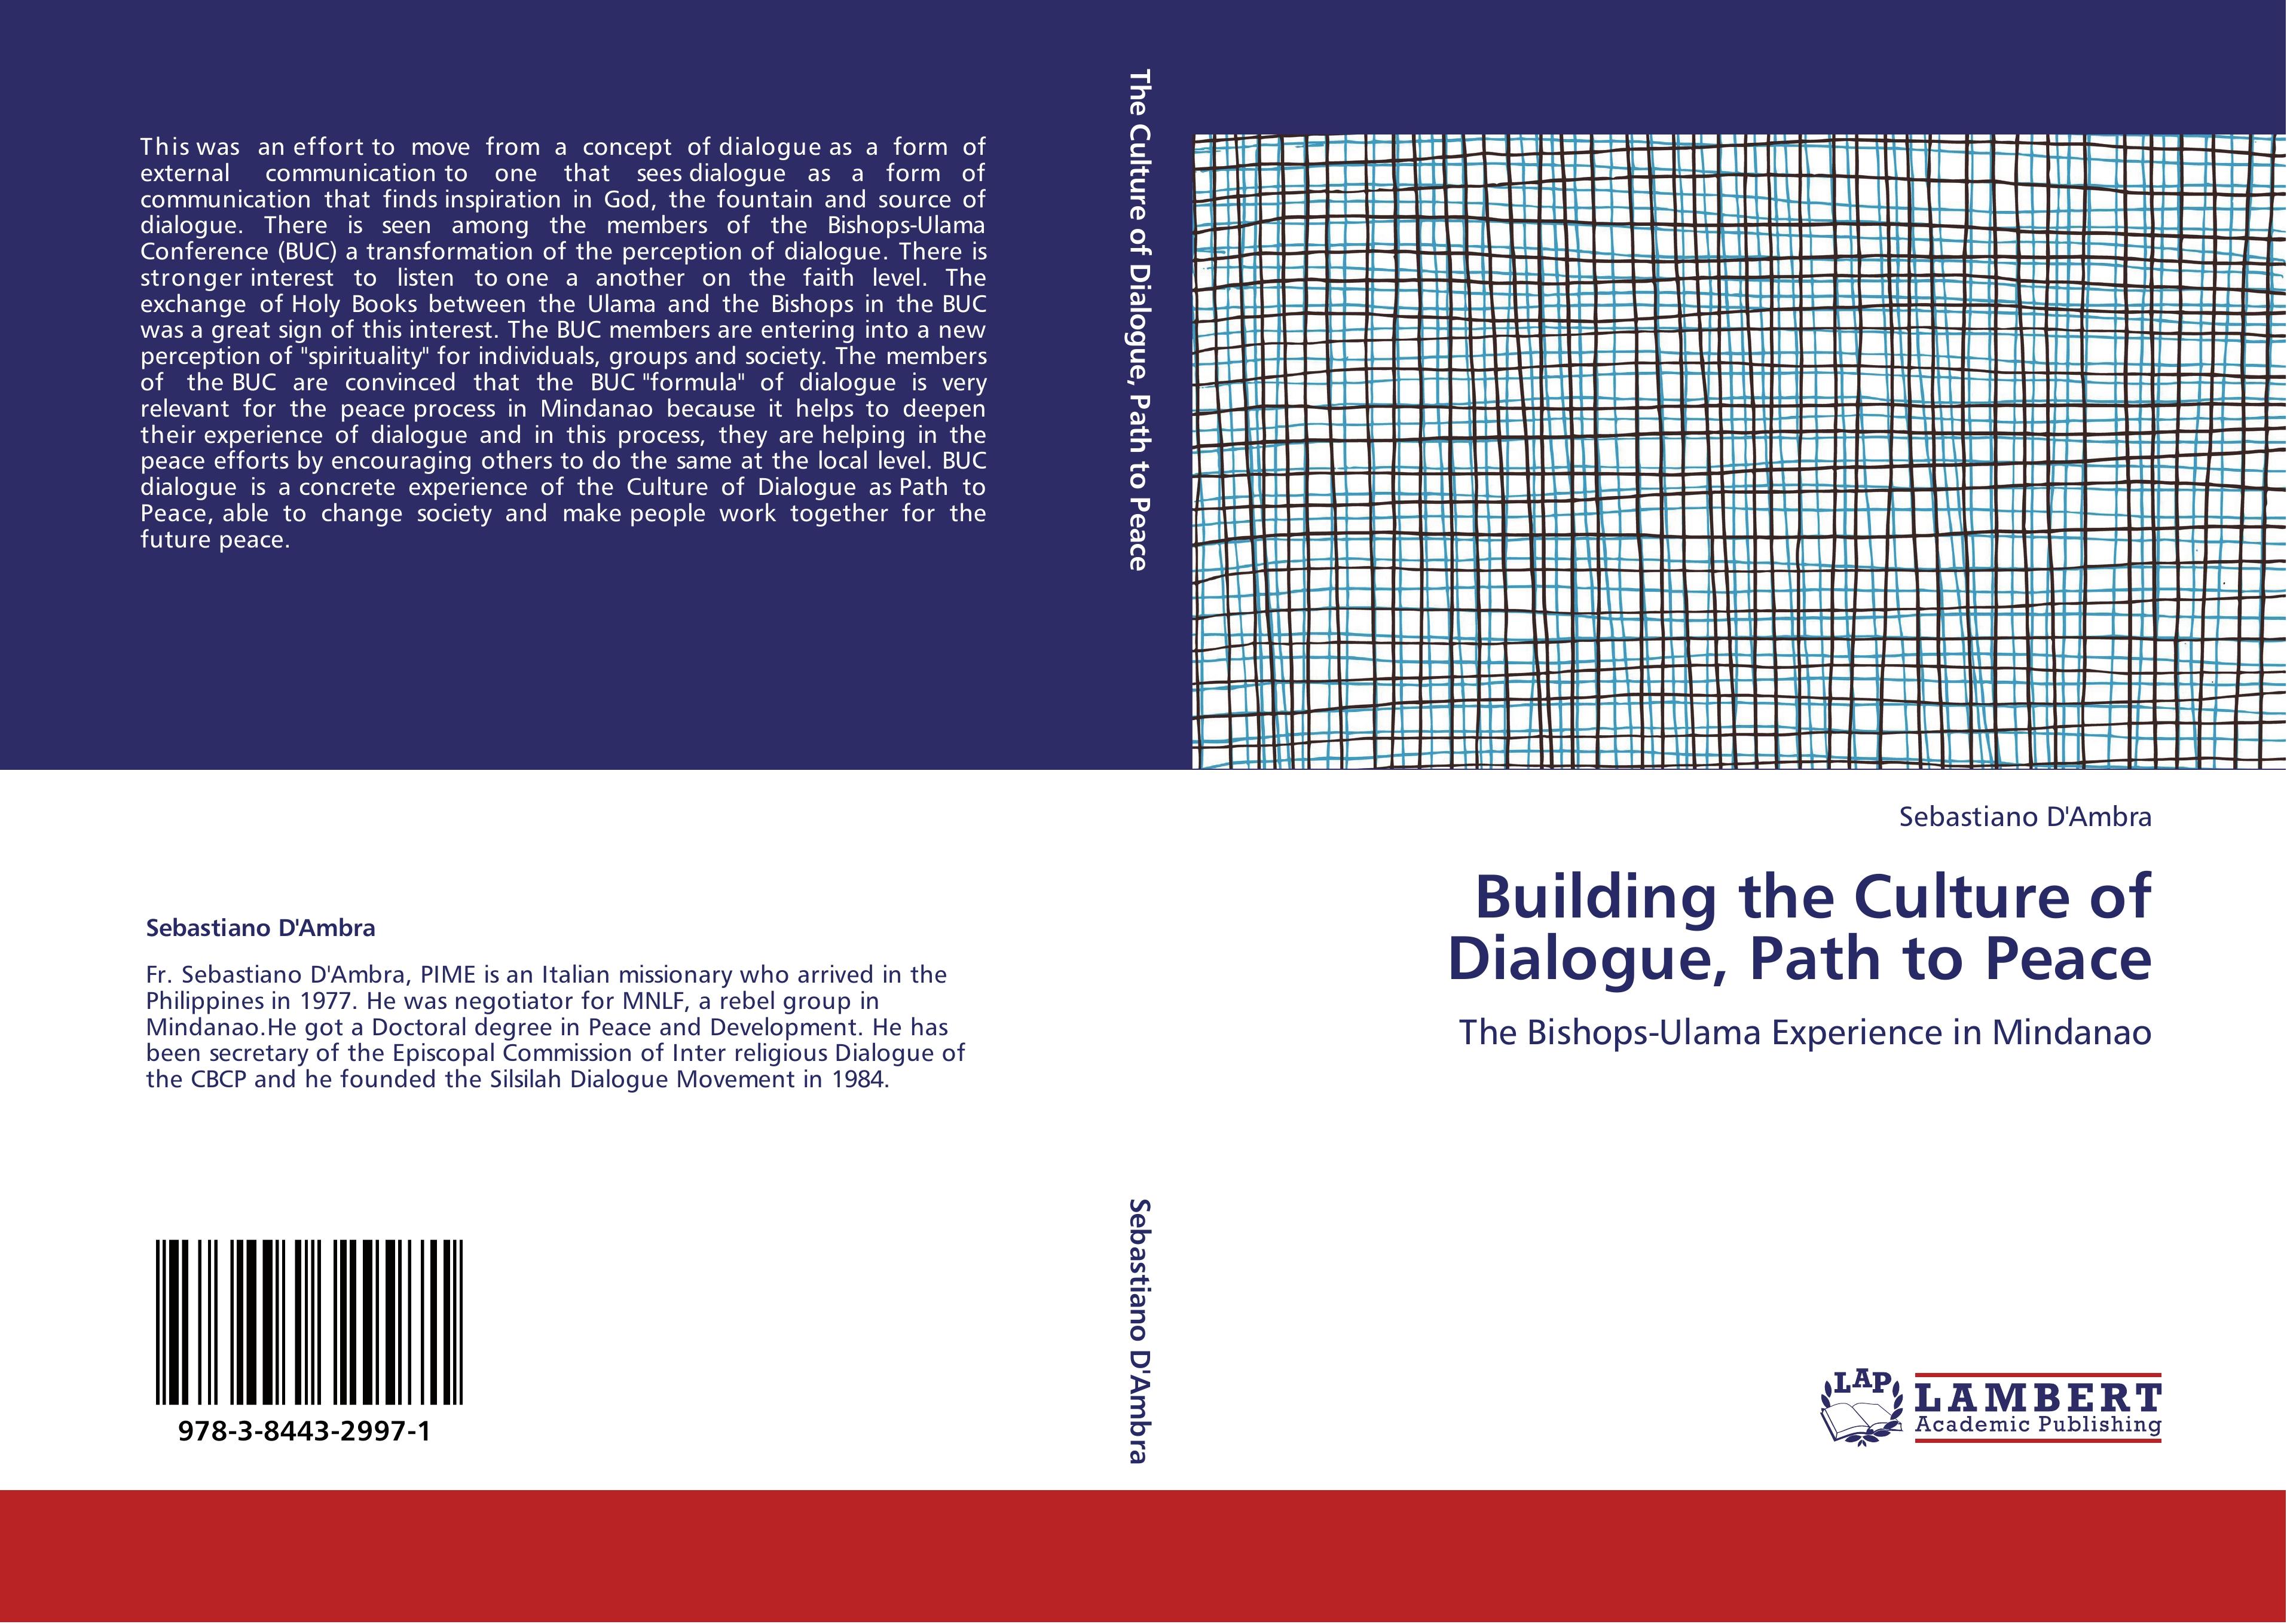 Building the Culture of Dialogue, Path to Peace - Sebastiano D Ambra